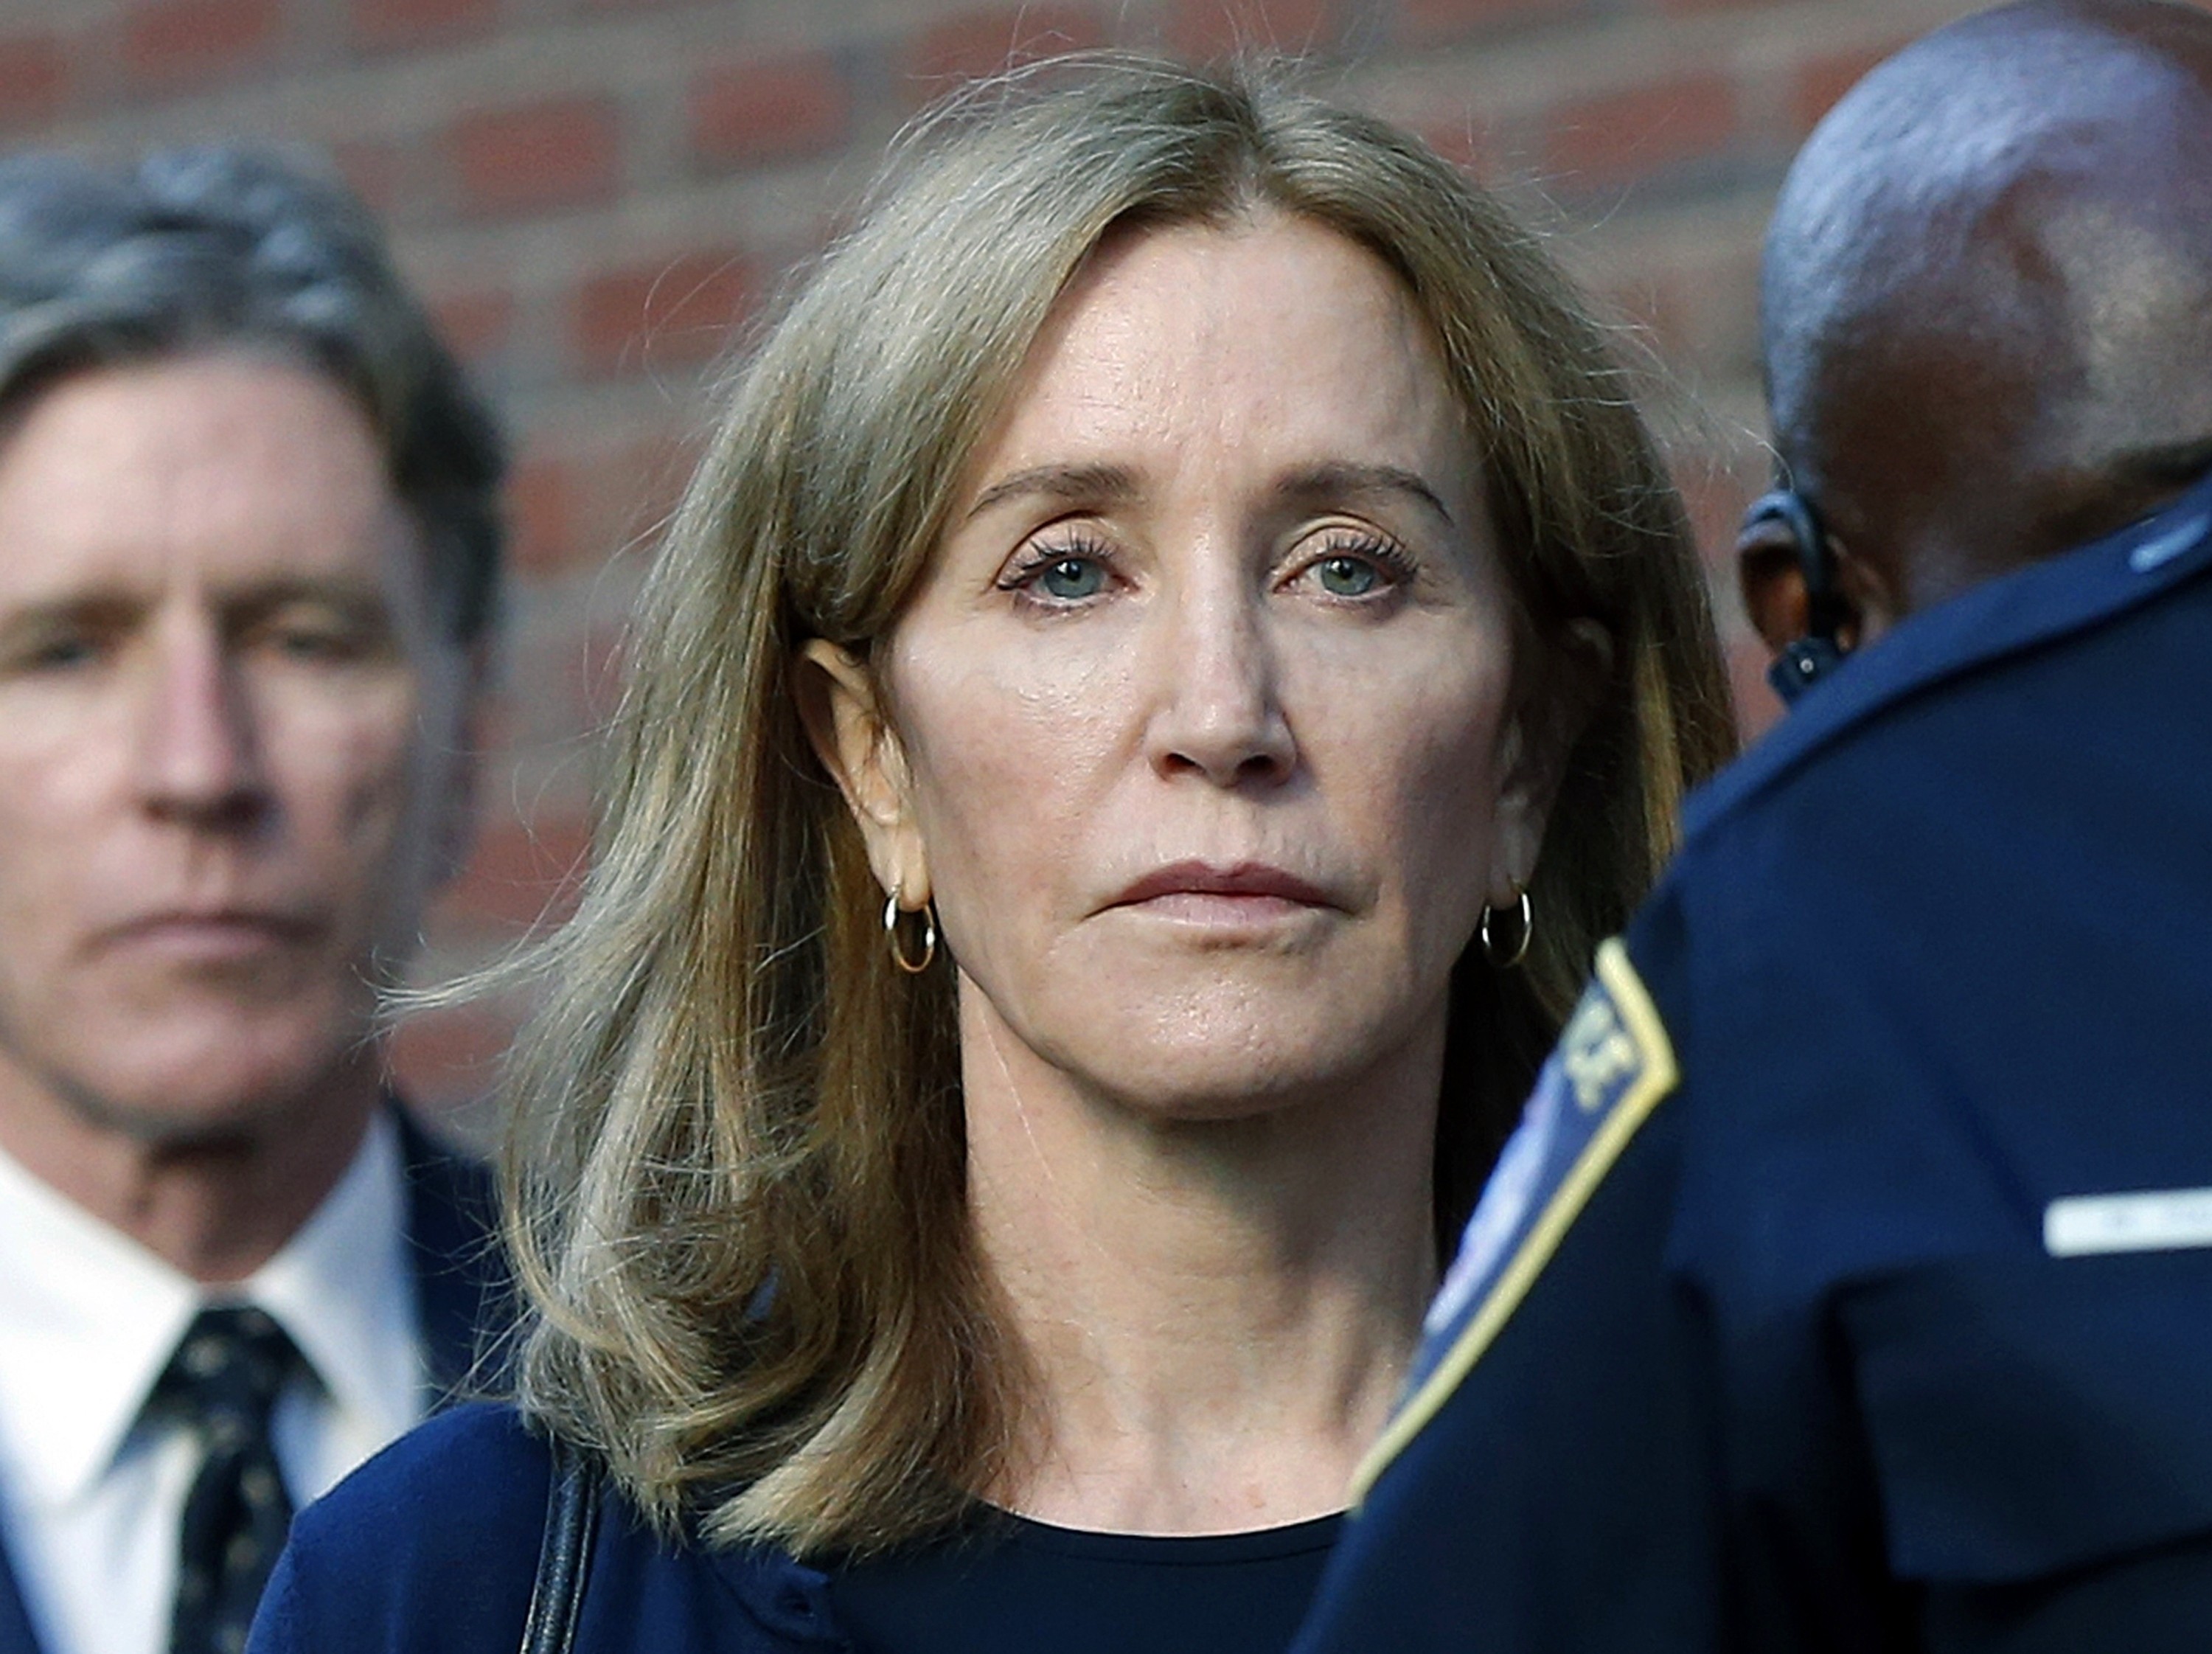 Actress Felicity Huffman leaves federal court in Boston with her brother Moore Huffman Jnr (left) in September, after she was sentenced in a nationwide college admissions bribery scandal. Photo: AP